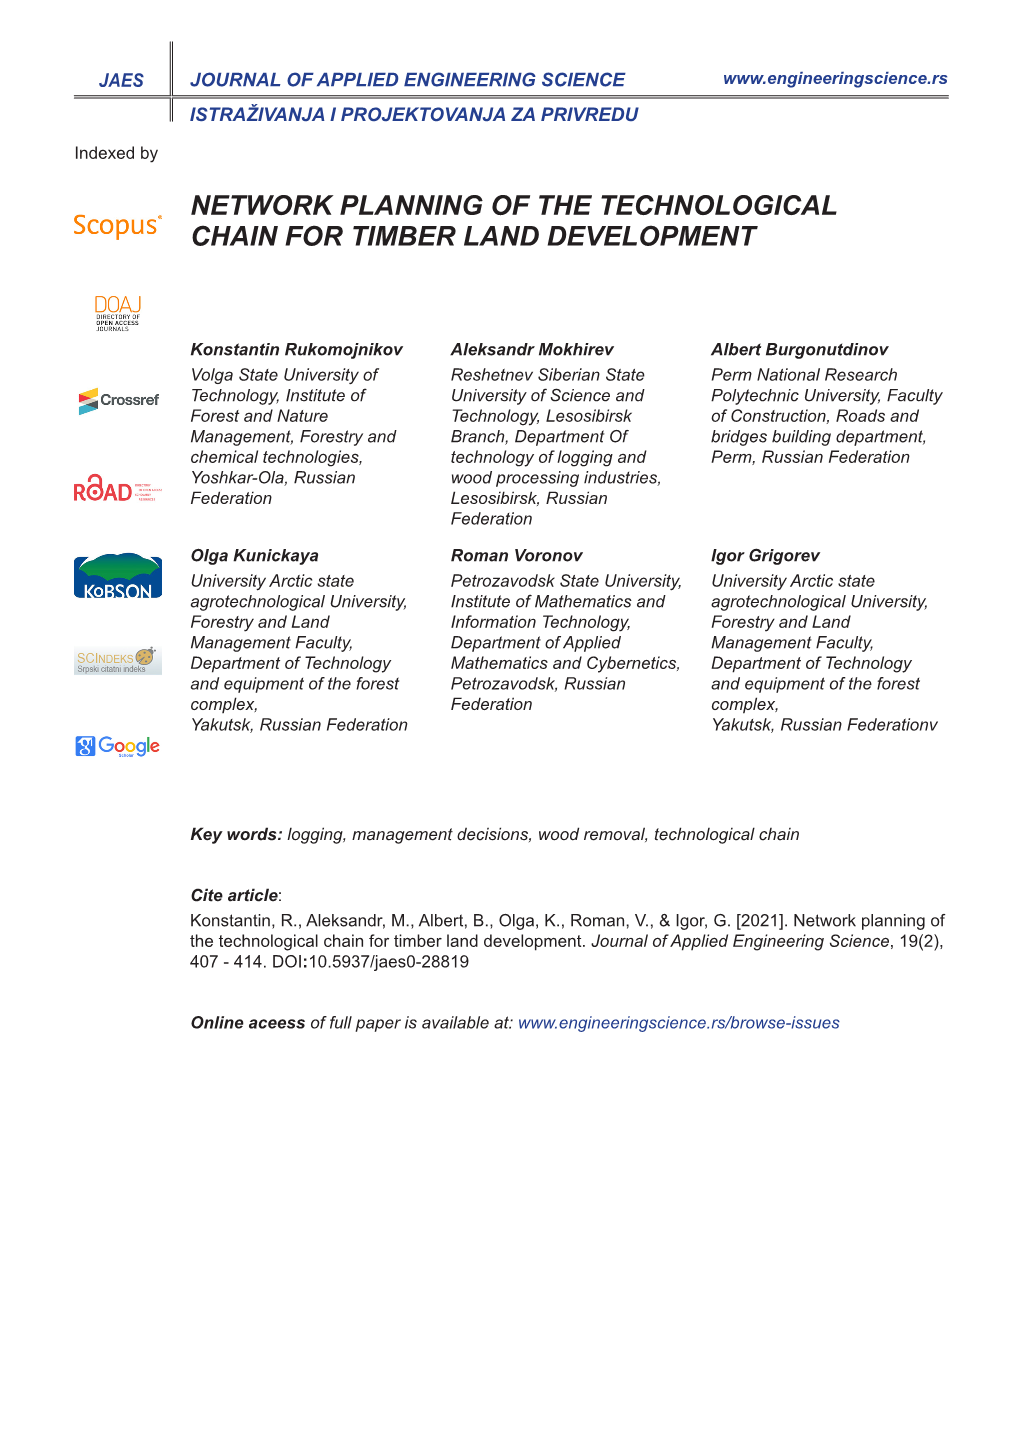 Network Planning of the Technological Chain for Timber Land Development